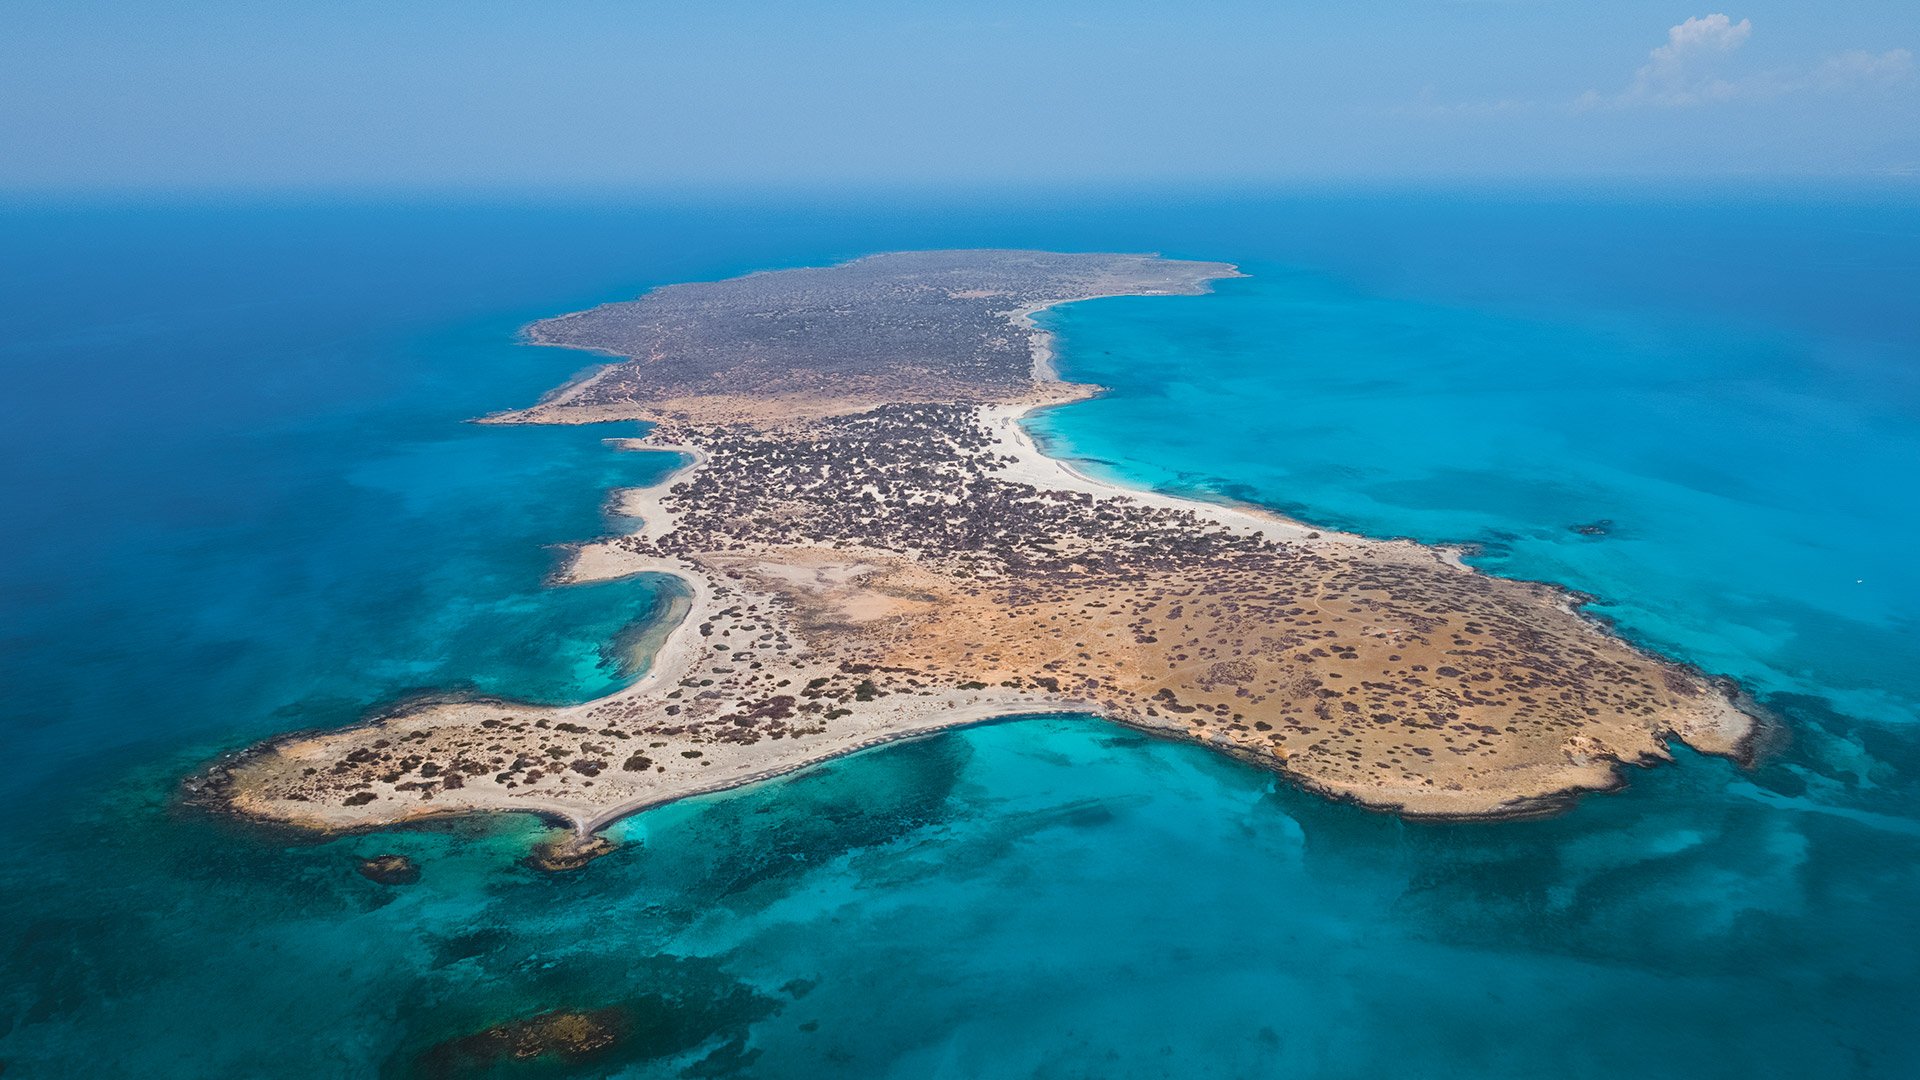 Chrissi islands is a part of Natura 2000 network, making it Europe’s southernmost protected environment